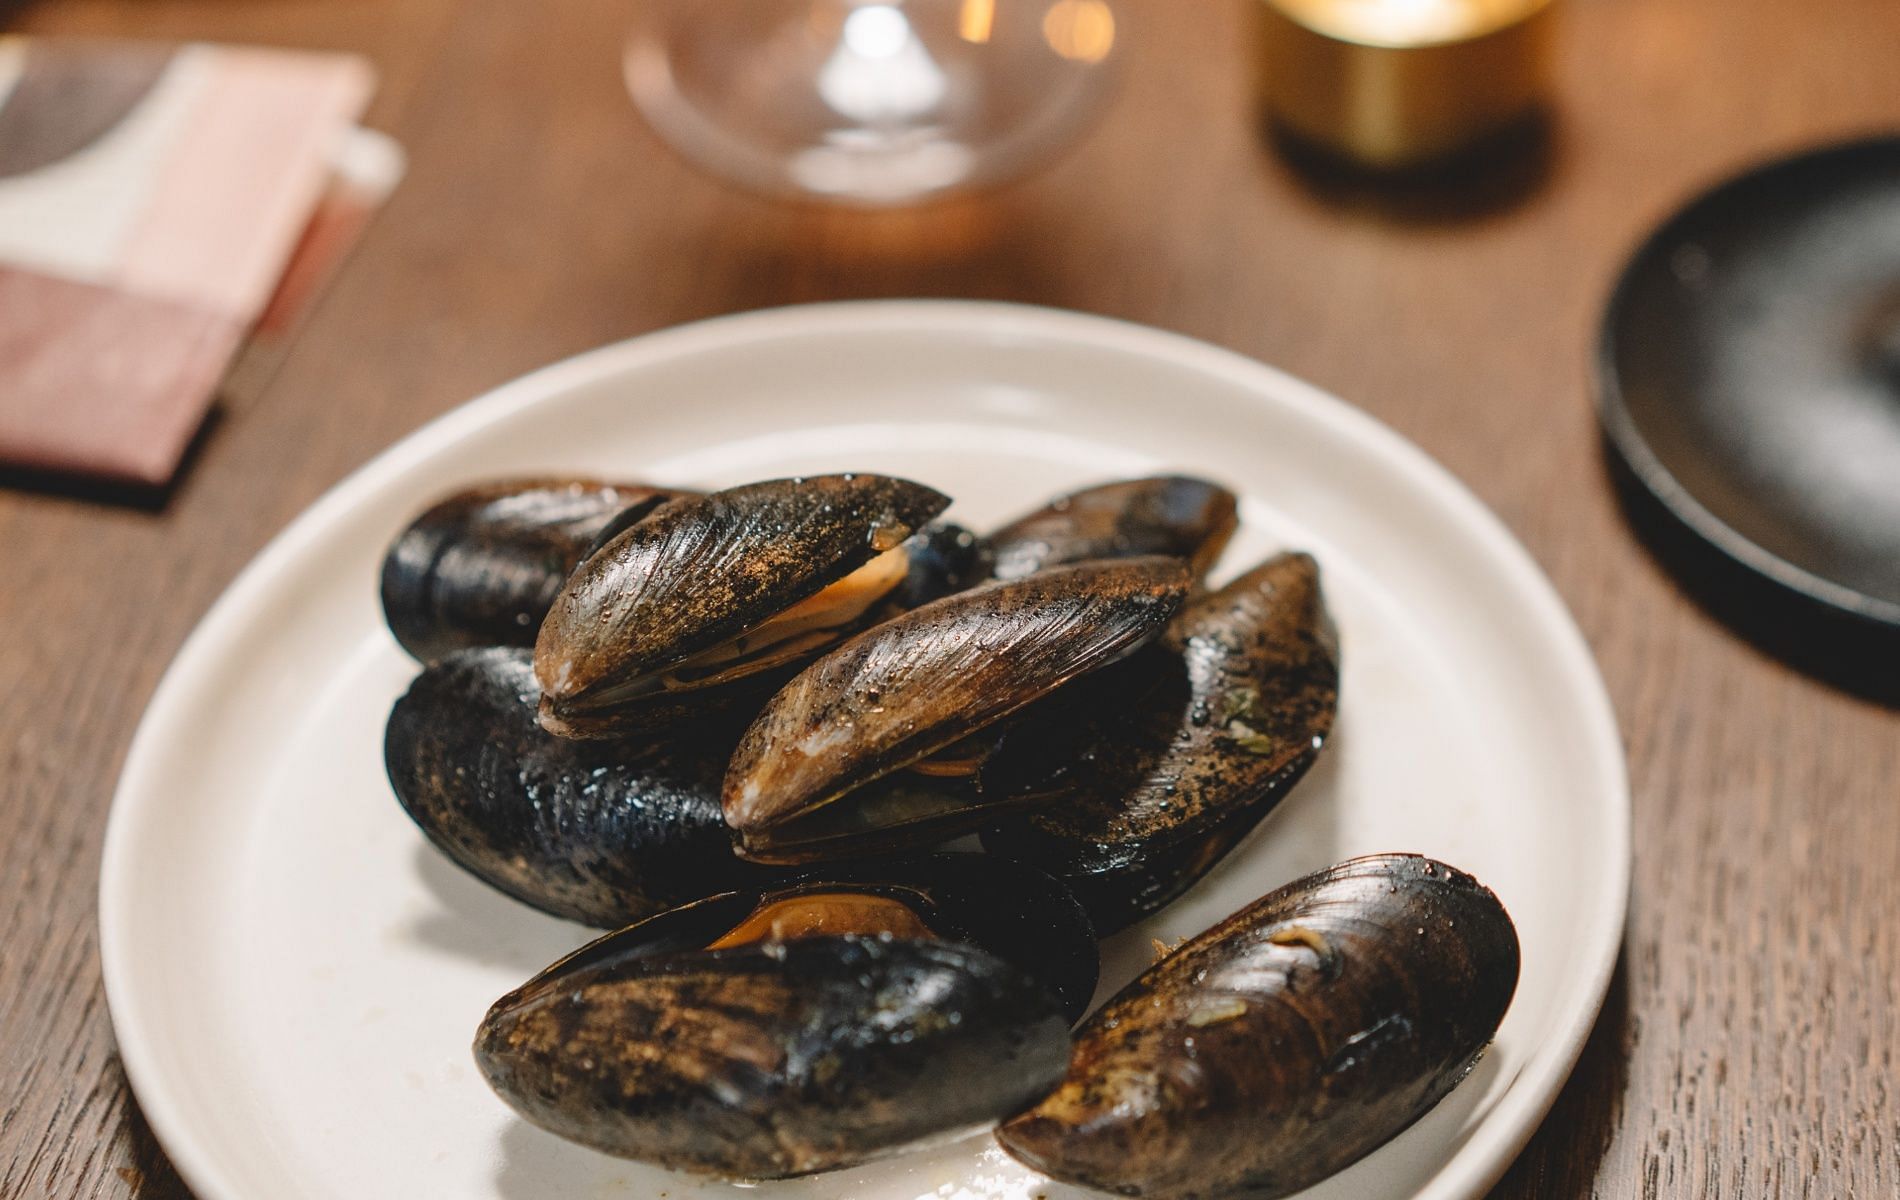 Mussels are usually found in intertidal zones (Image by Cottonbro Studio via Pexels)